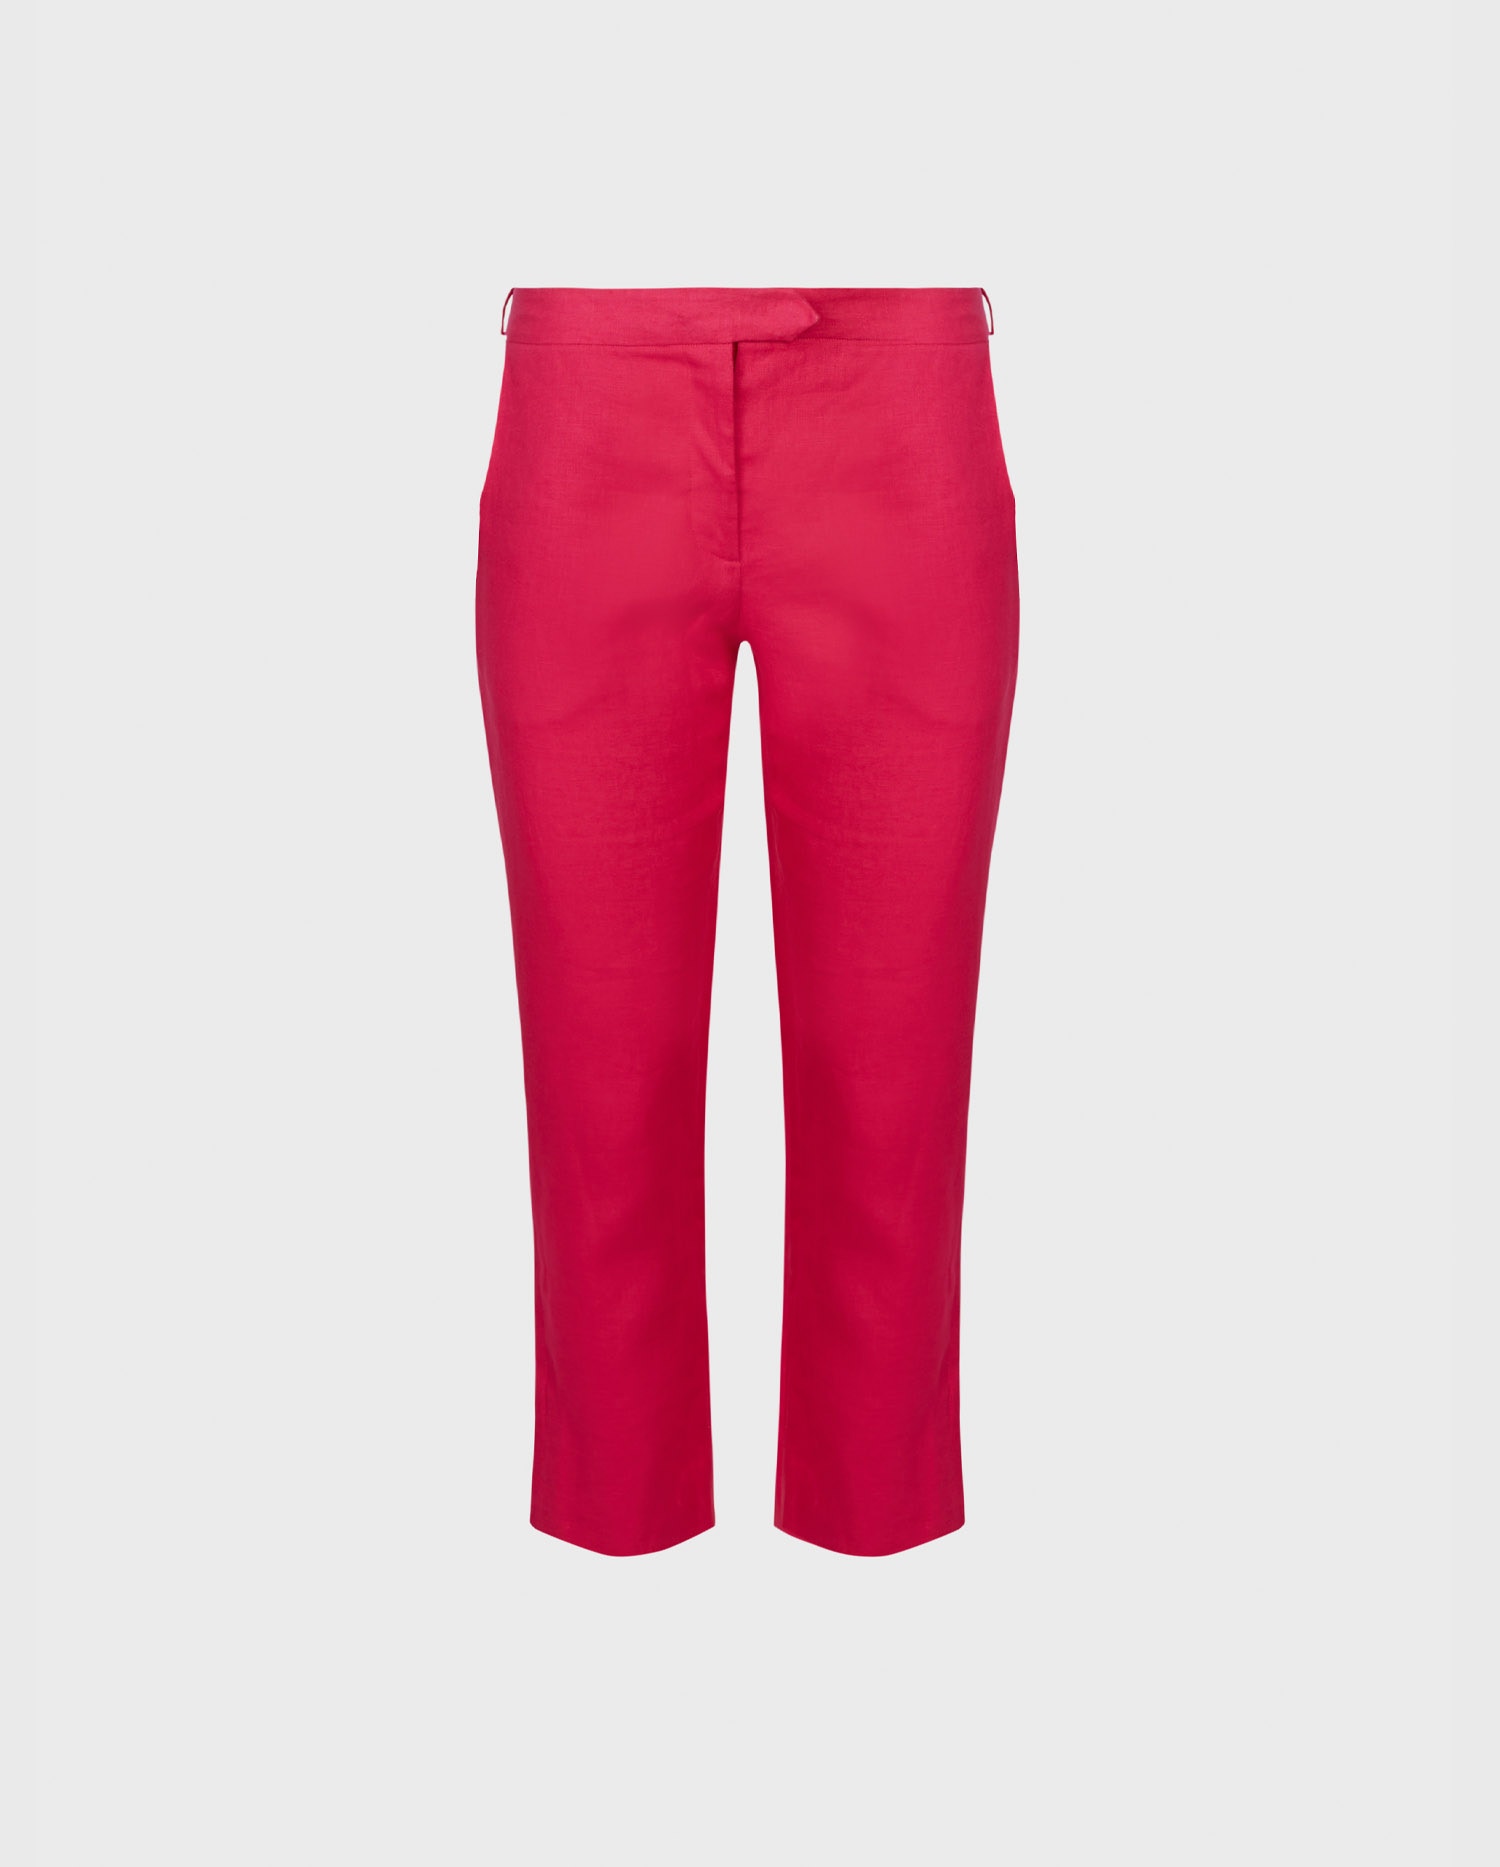 Discover The ESPELETTE Cropped bright pink tapered linen pants from ANNE FONTAINE